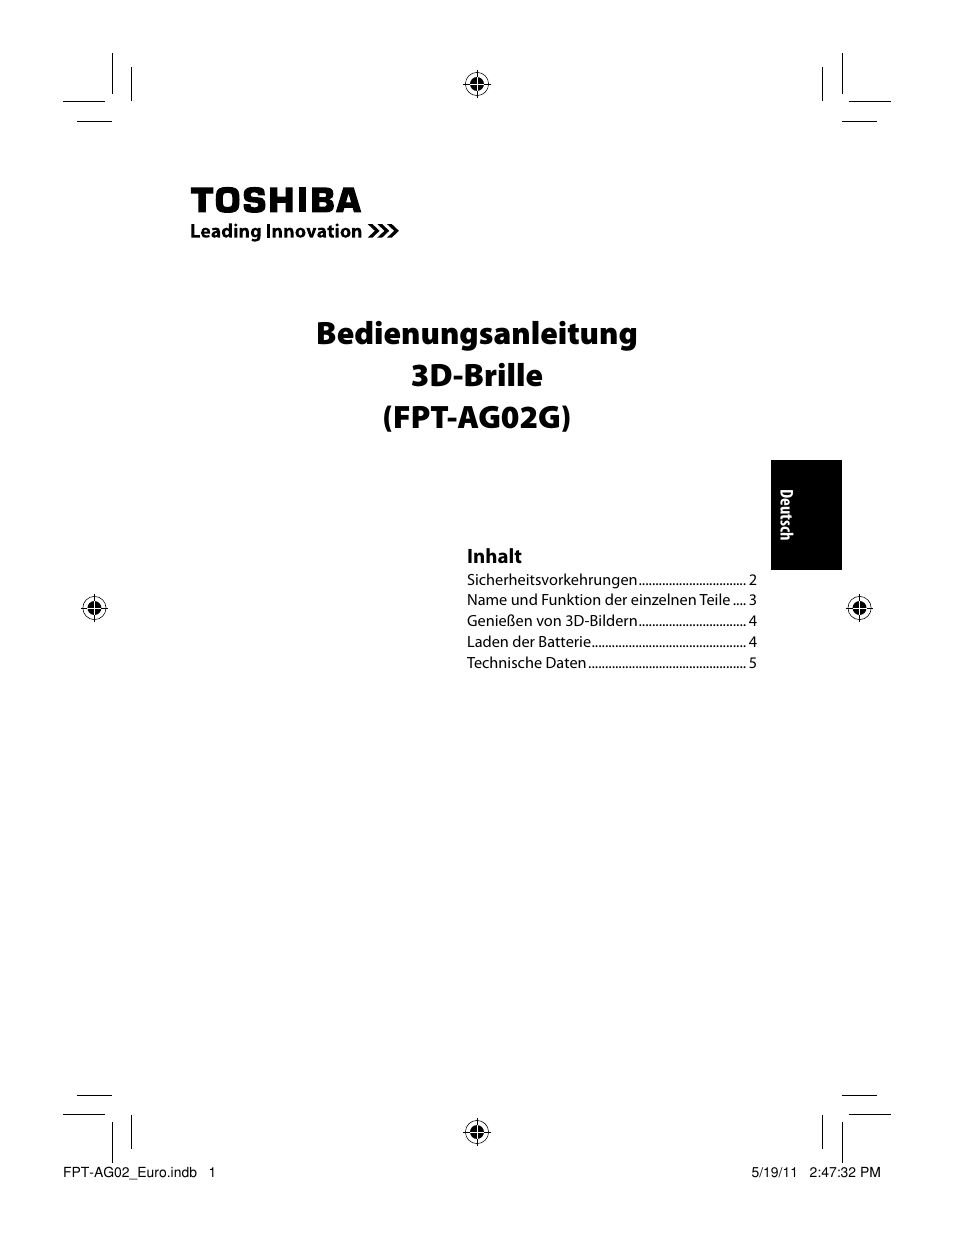 Bedienungsanleitung 3d-brille (fpt-ag02g) | Toshiba FPTAG02G User Manual |  Page 15 / 108